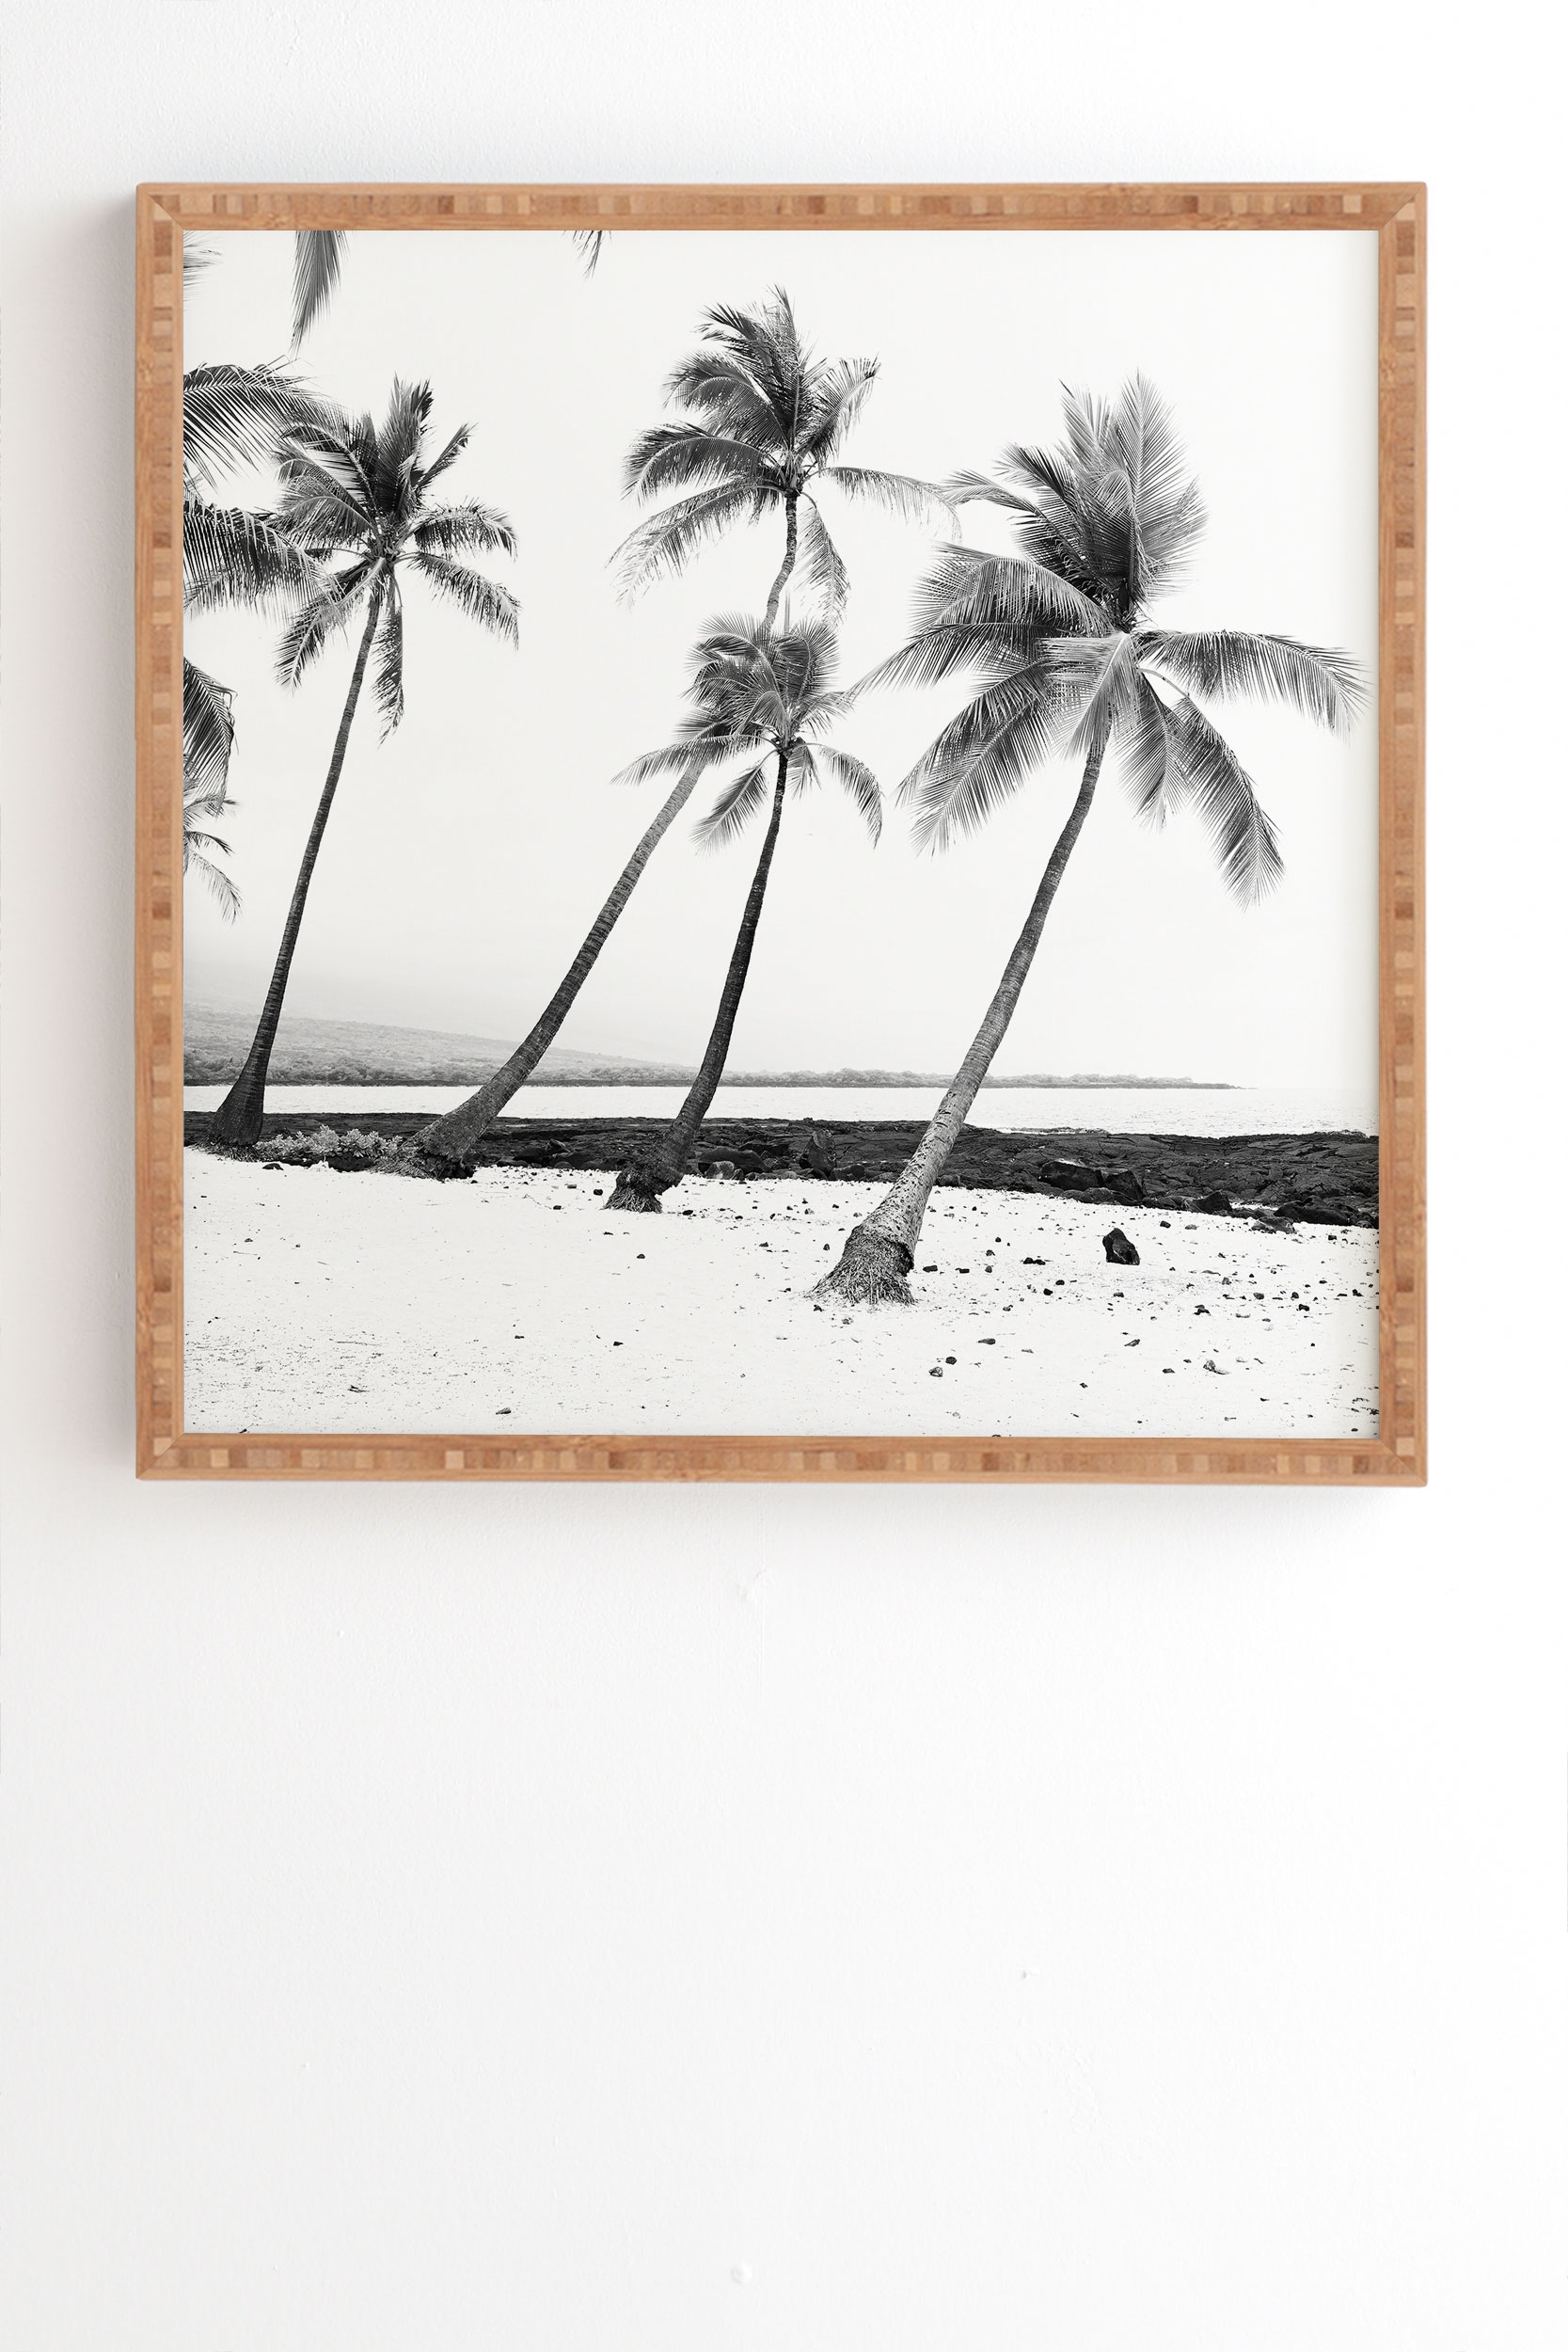 Island Time by Bree Madden - Framed Wall Art Bamboo 19" x 22.4" - Image 1